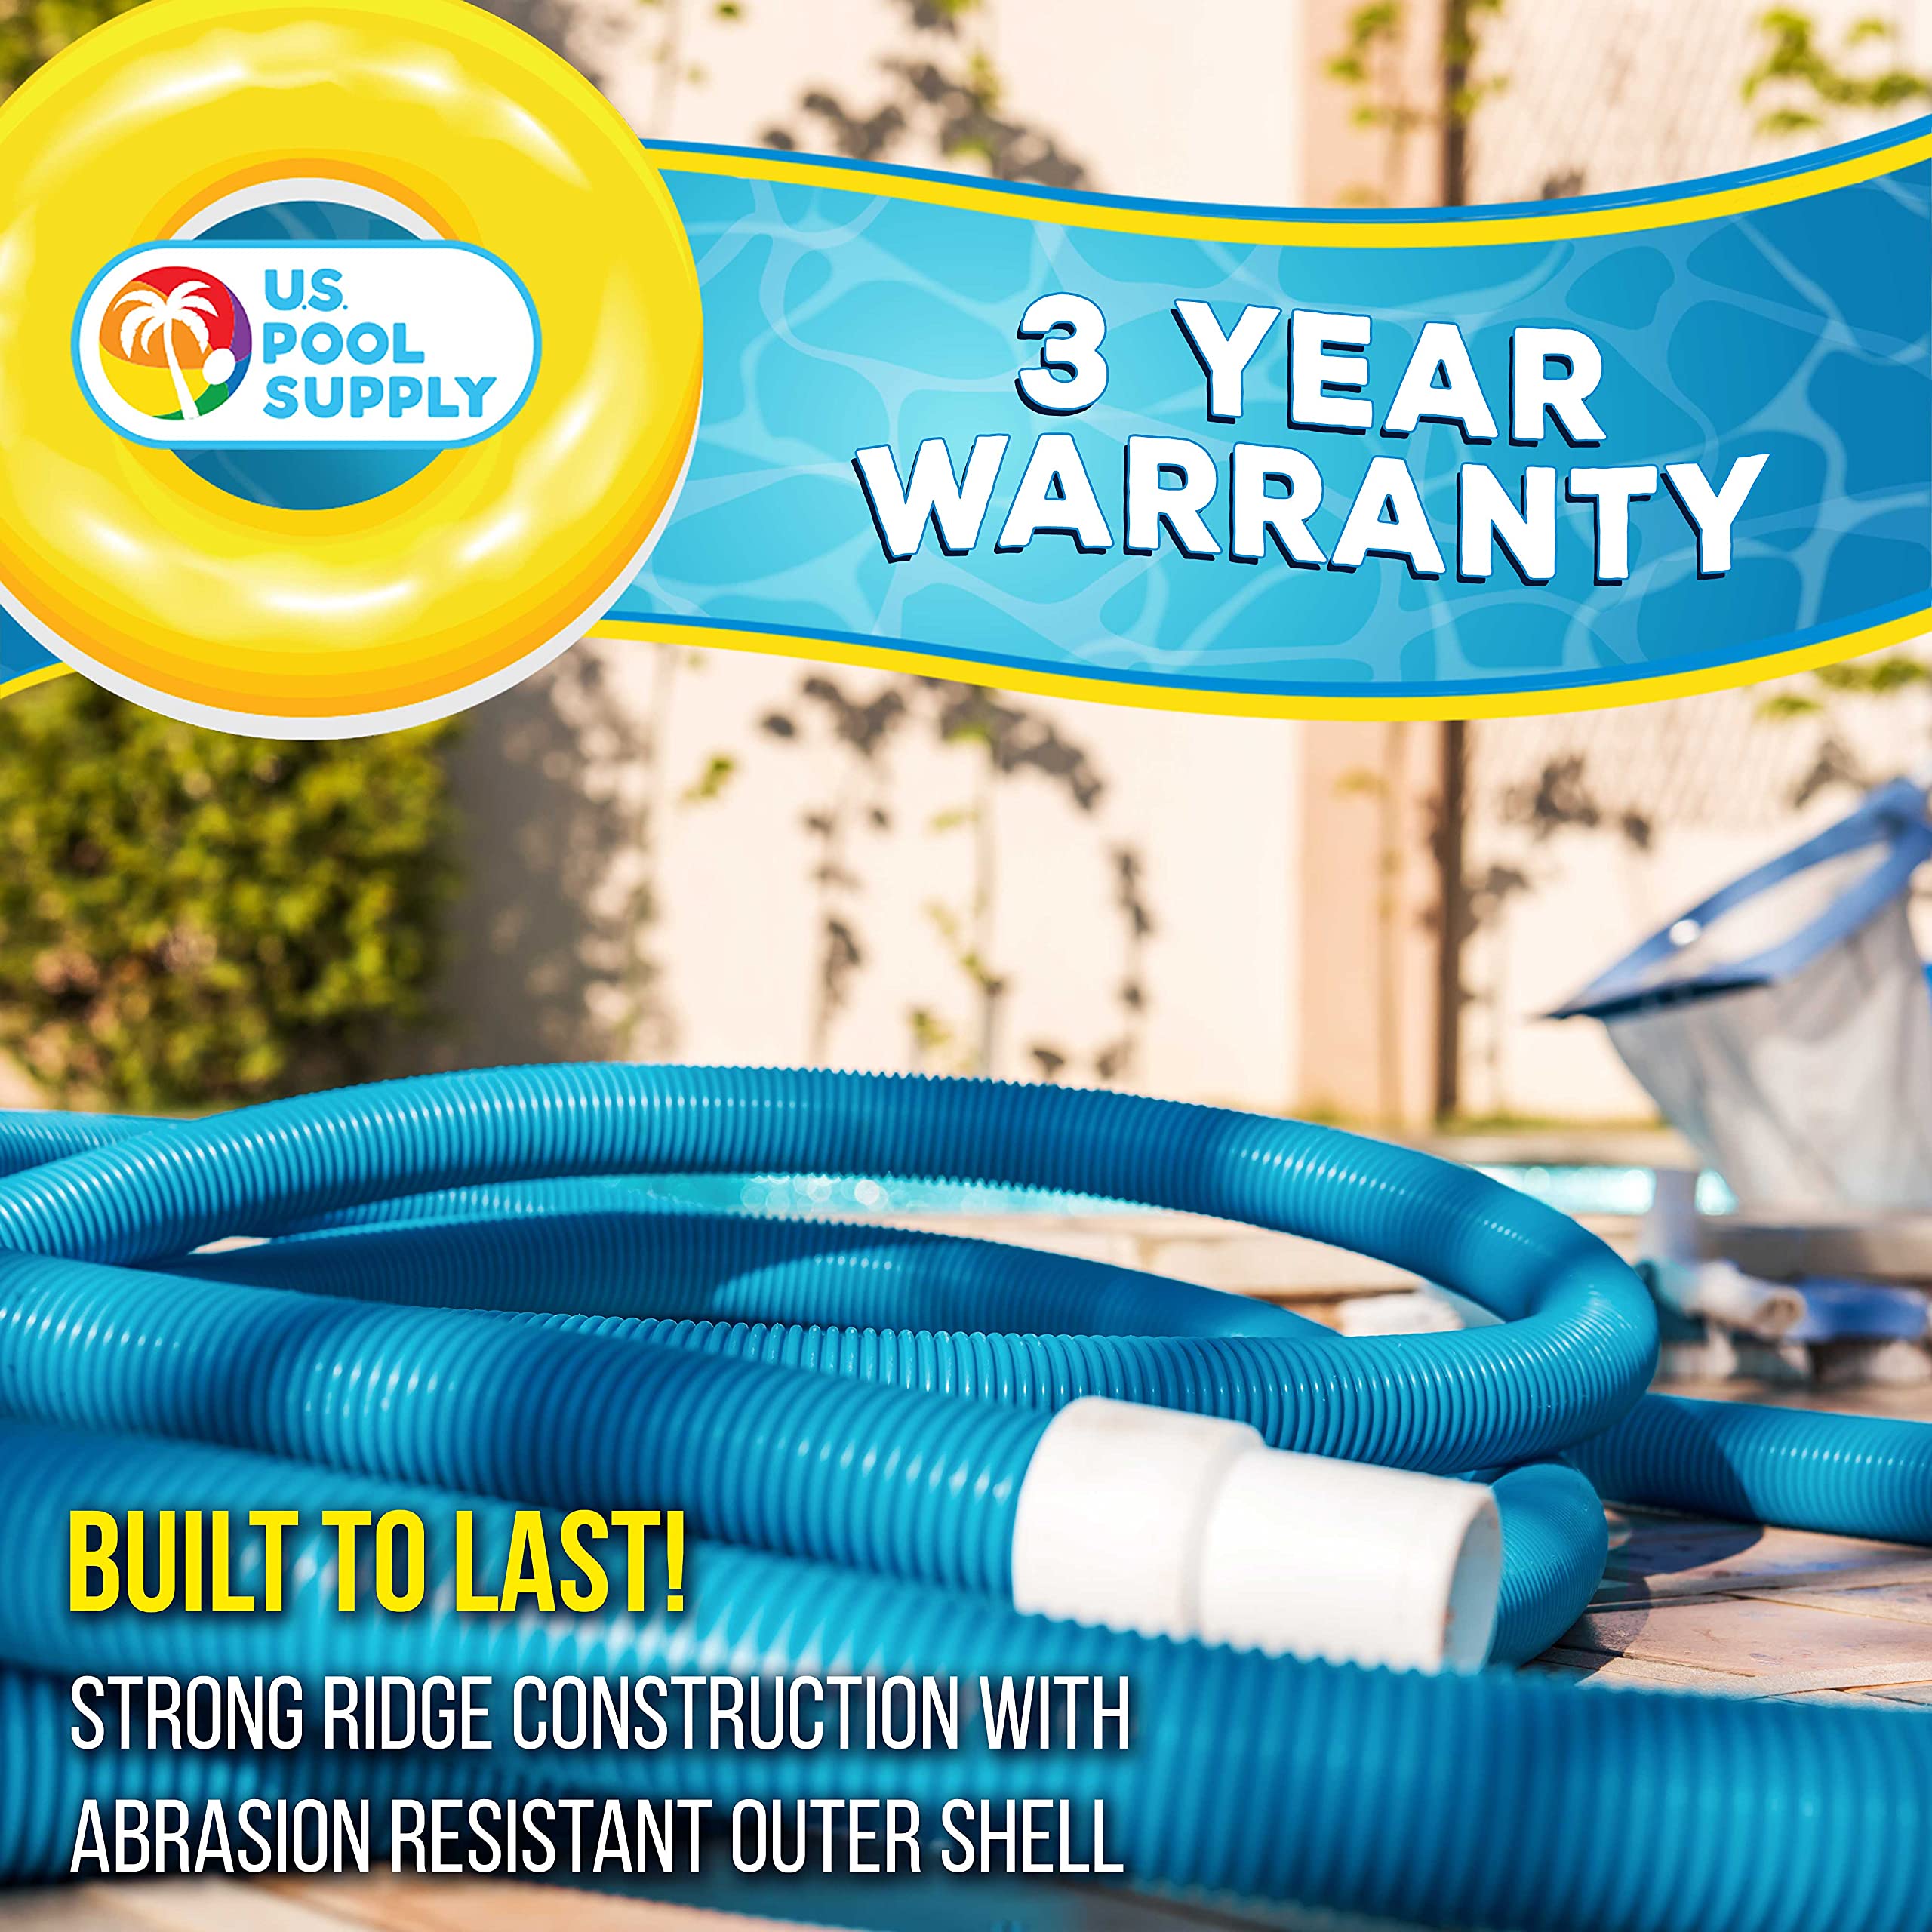 U.S. Pool Supply 1-1/2" x 25 Foot Professional Above Ground Swimming Pool Vacuum Hose with Swivel Cuff - Removable Cuff, Cut to Fit - Compatible with Filter Pumps, Filtration Systems, Chlorinators